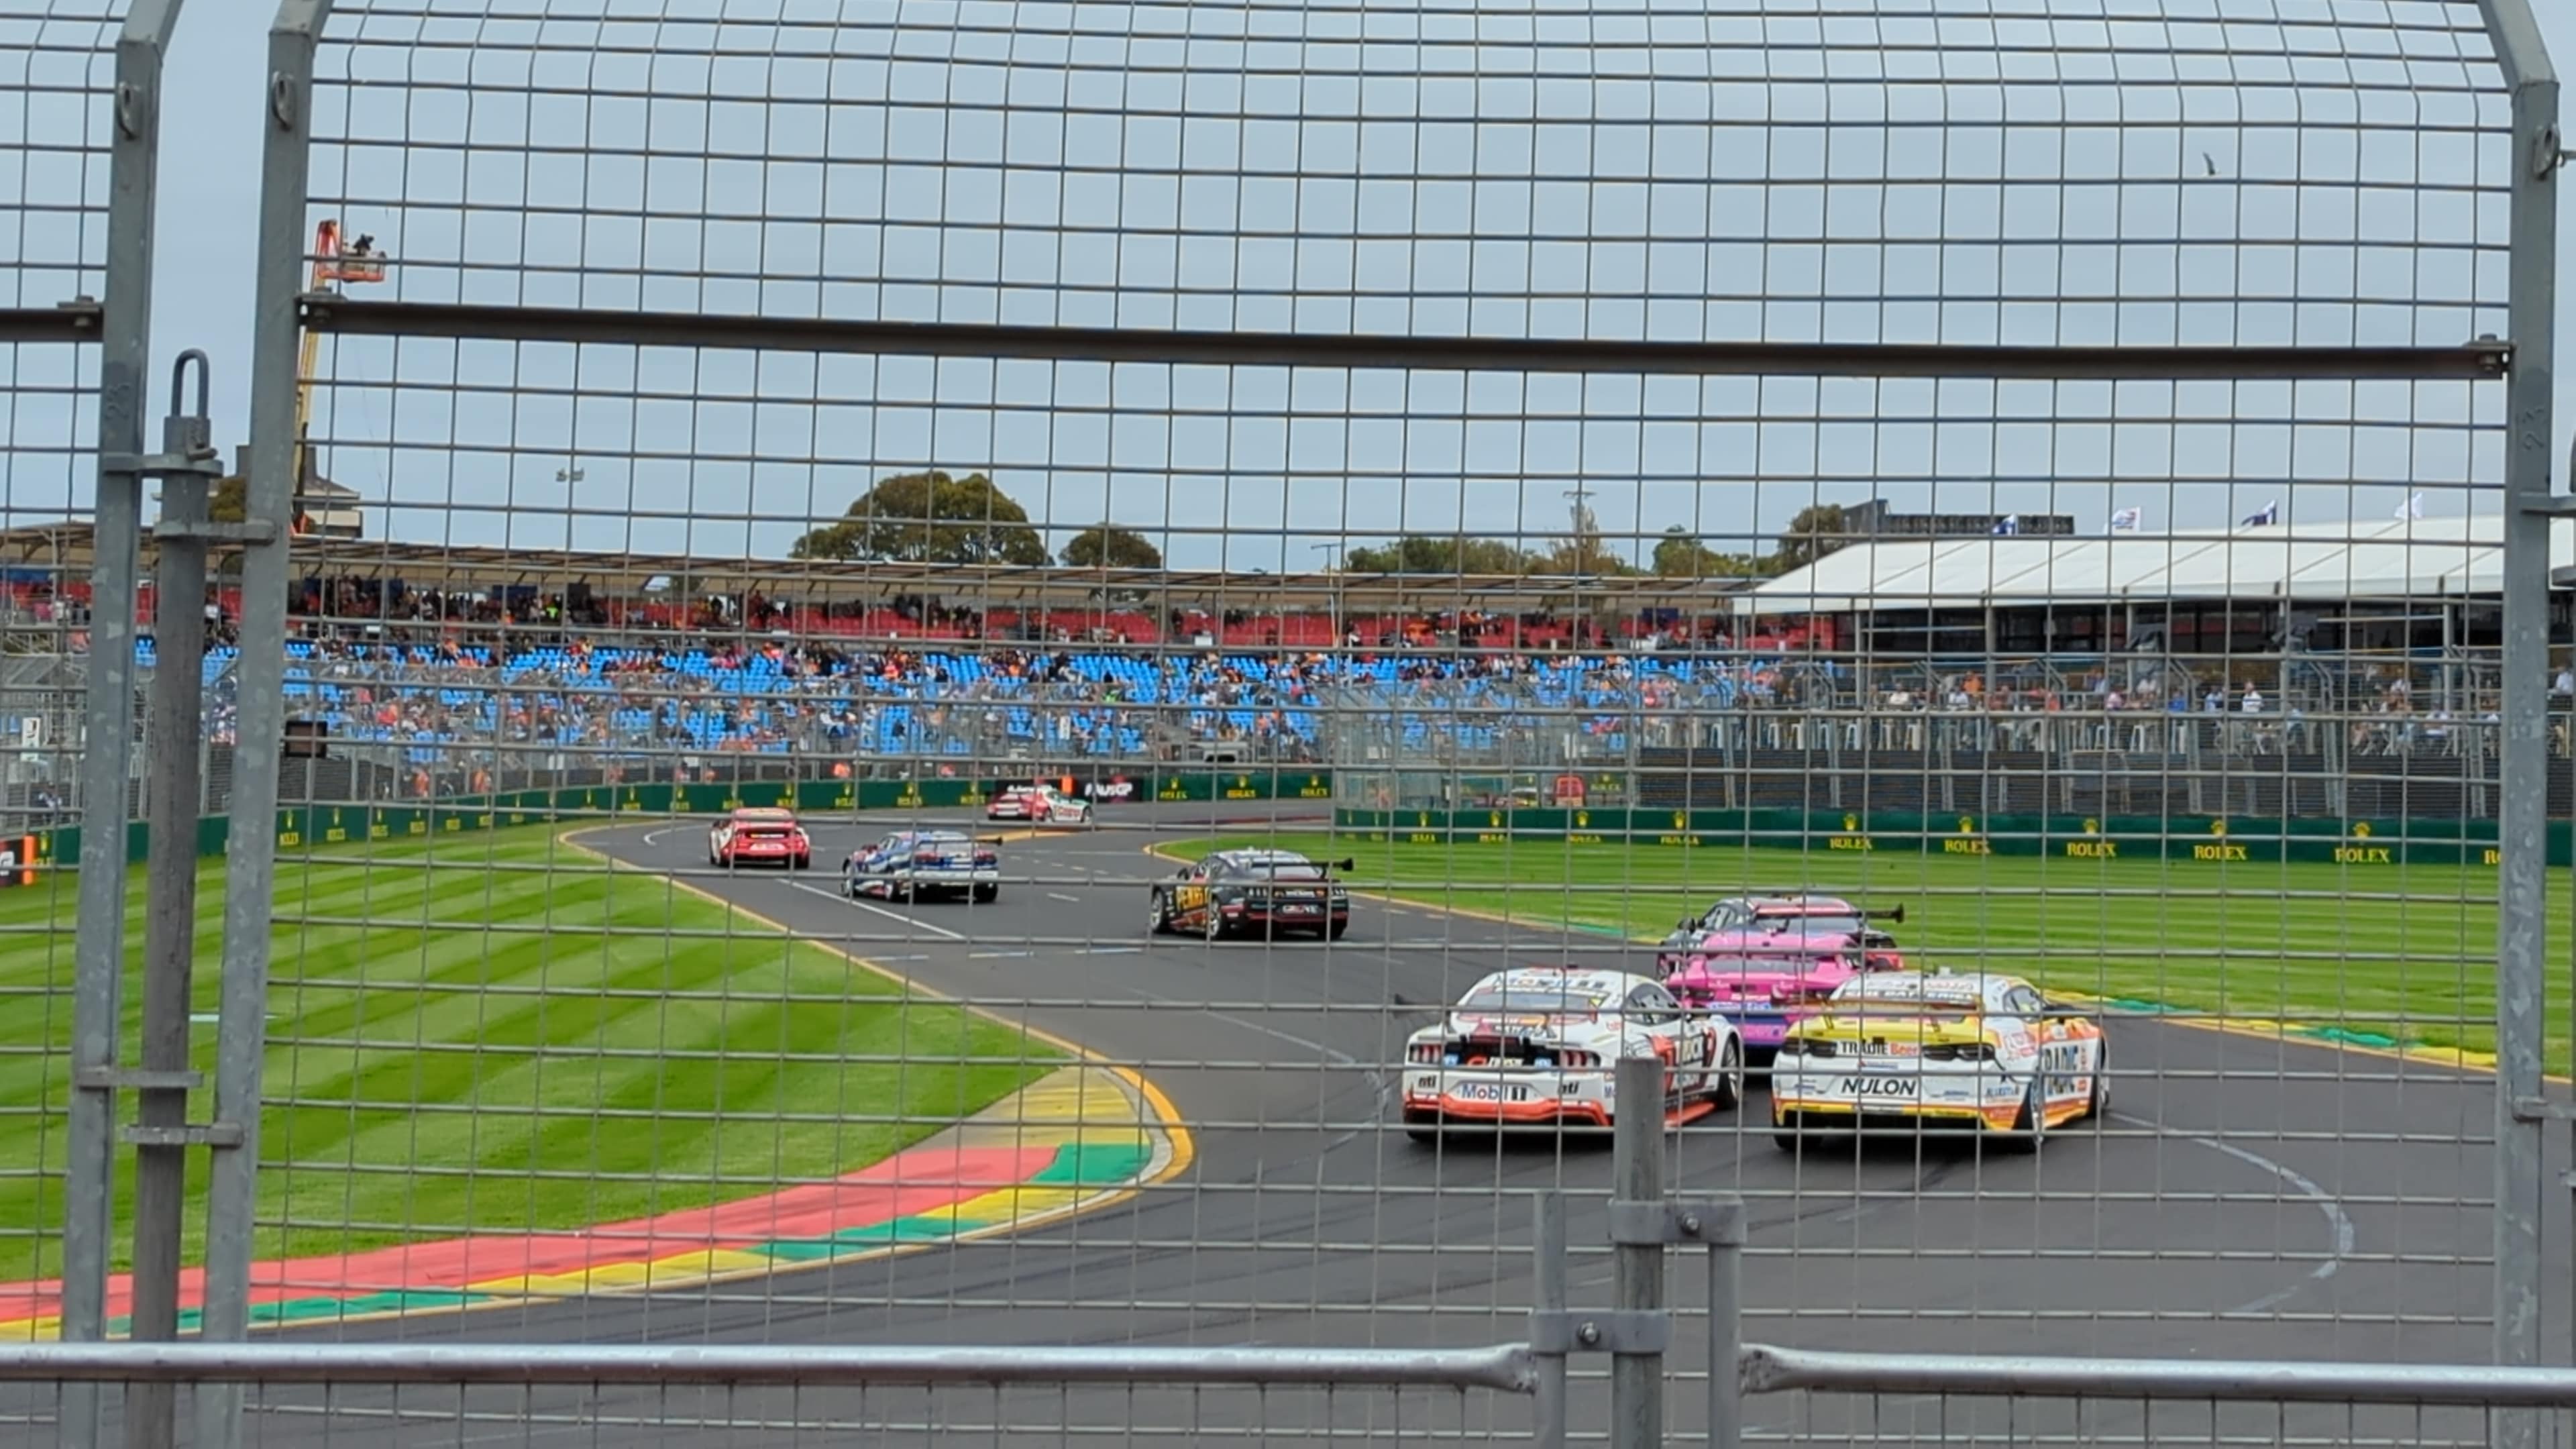 Final V8 Supercars race of the weekend